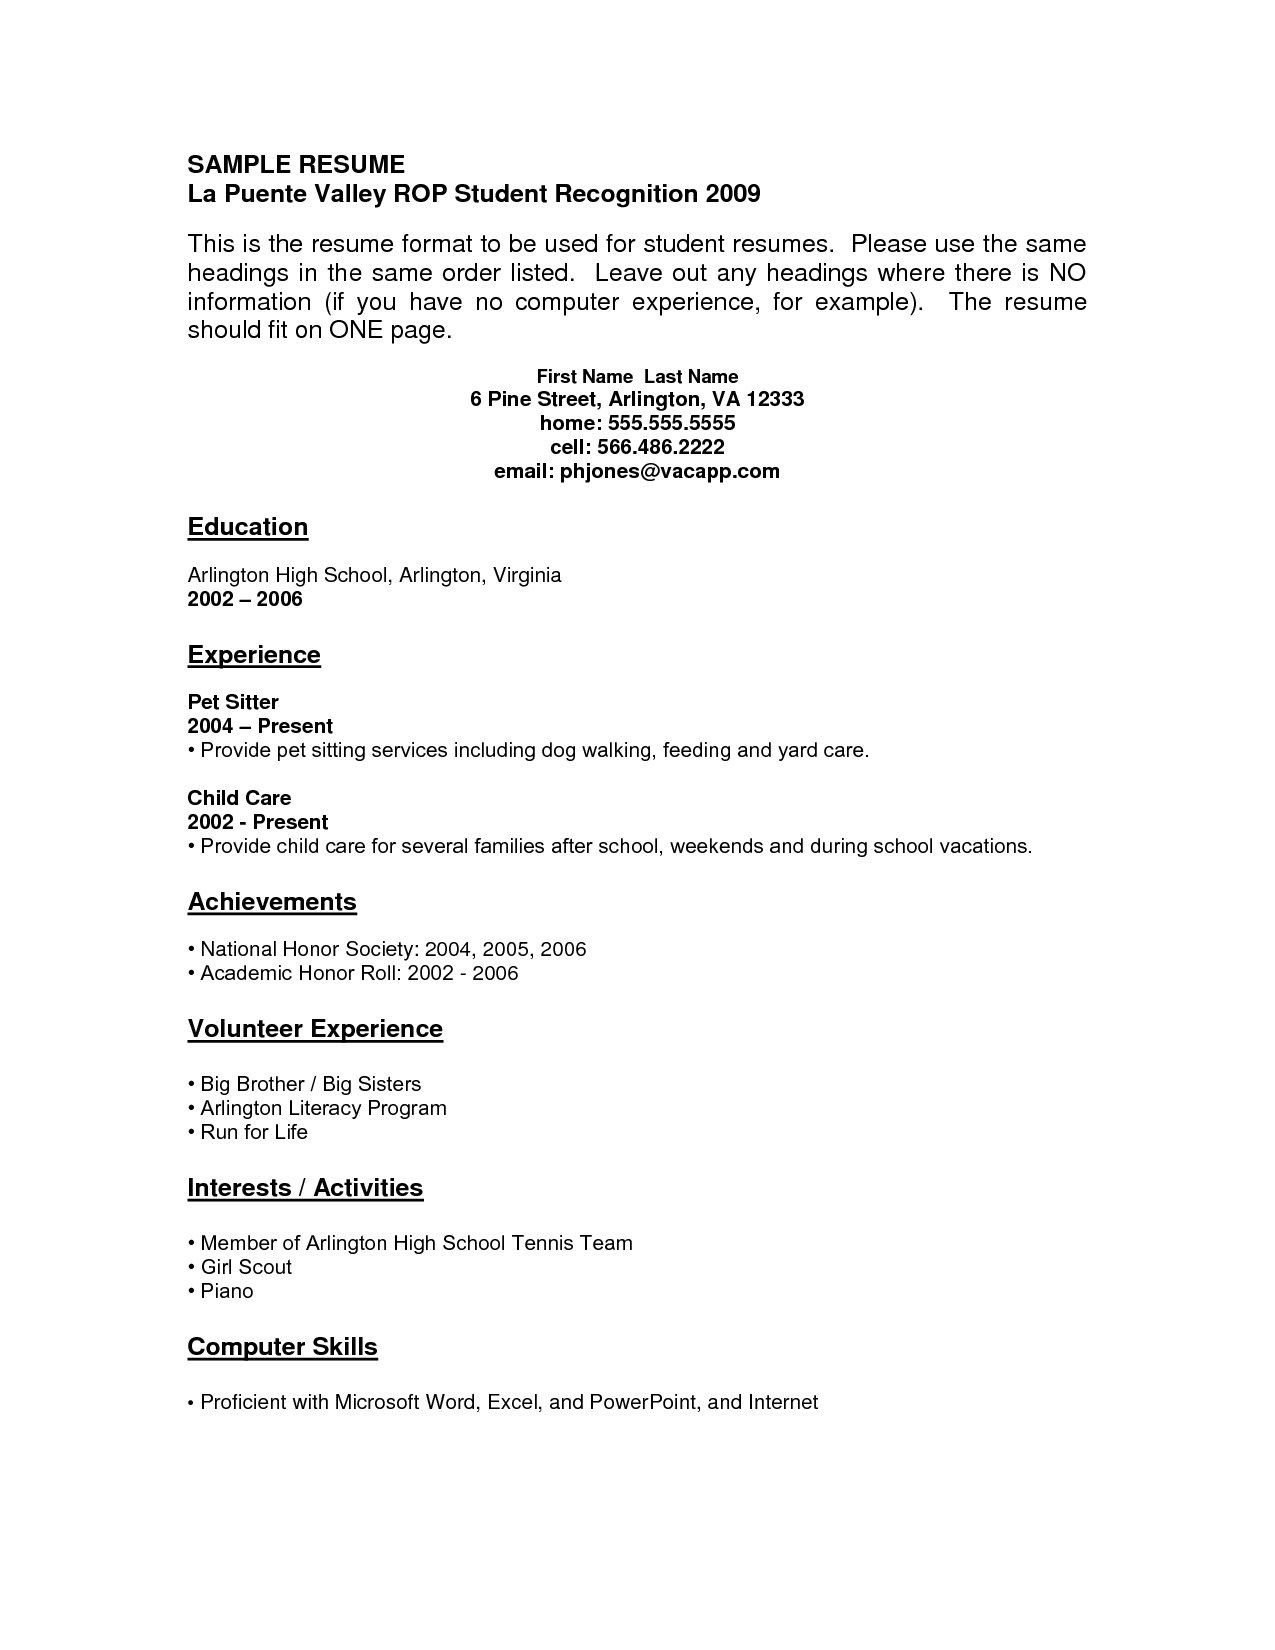 Sample Resume for School Job with No Experience Resume Examples with No Job Experience – Resume Templates …